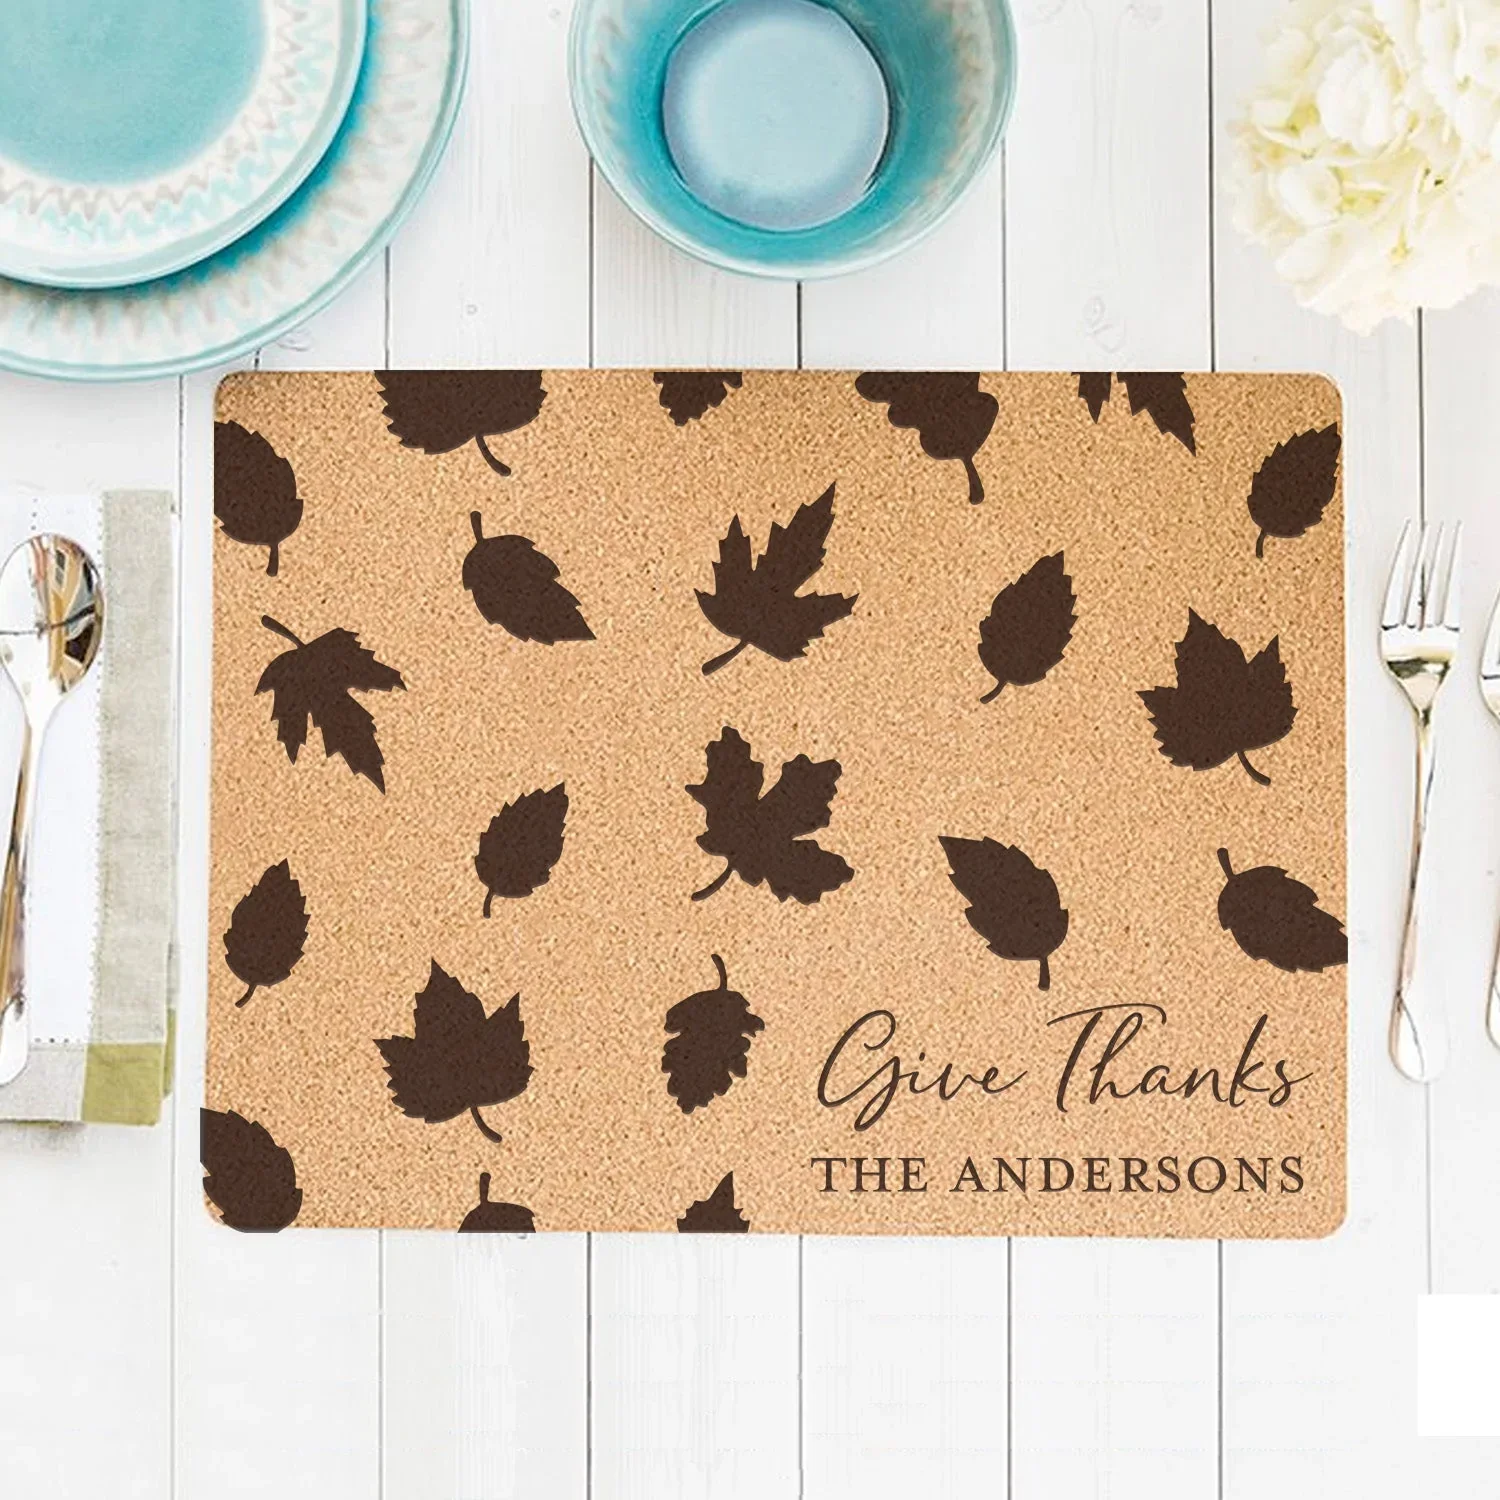 Image of Personalized Cork Placemats - Friendsgiving